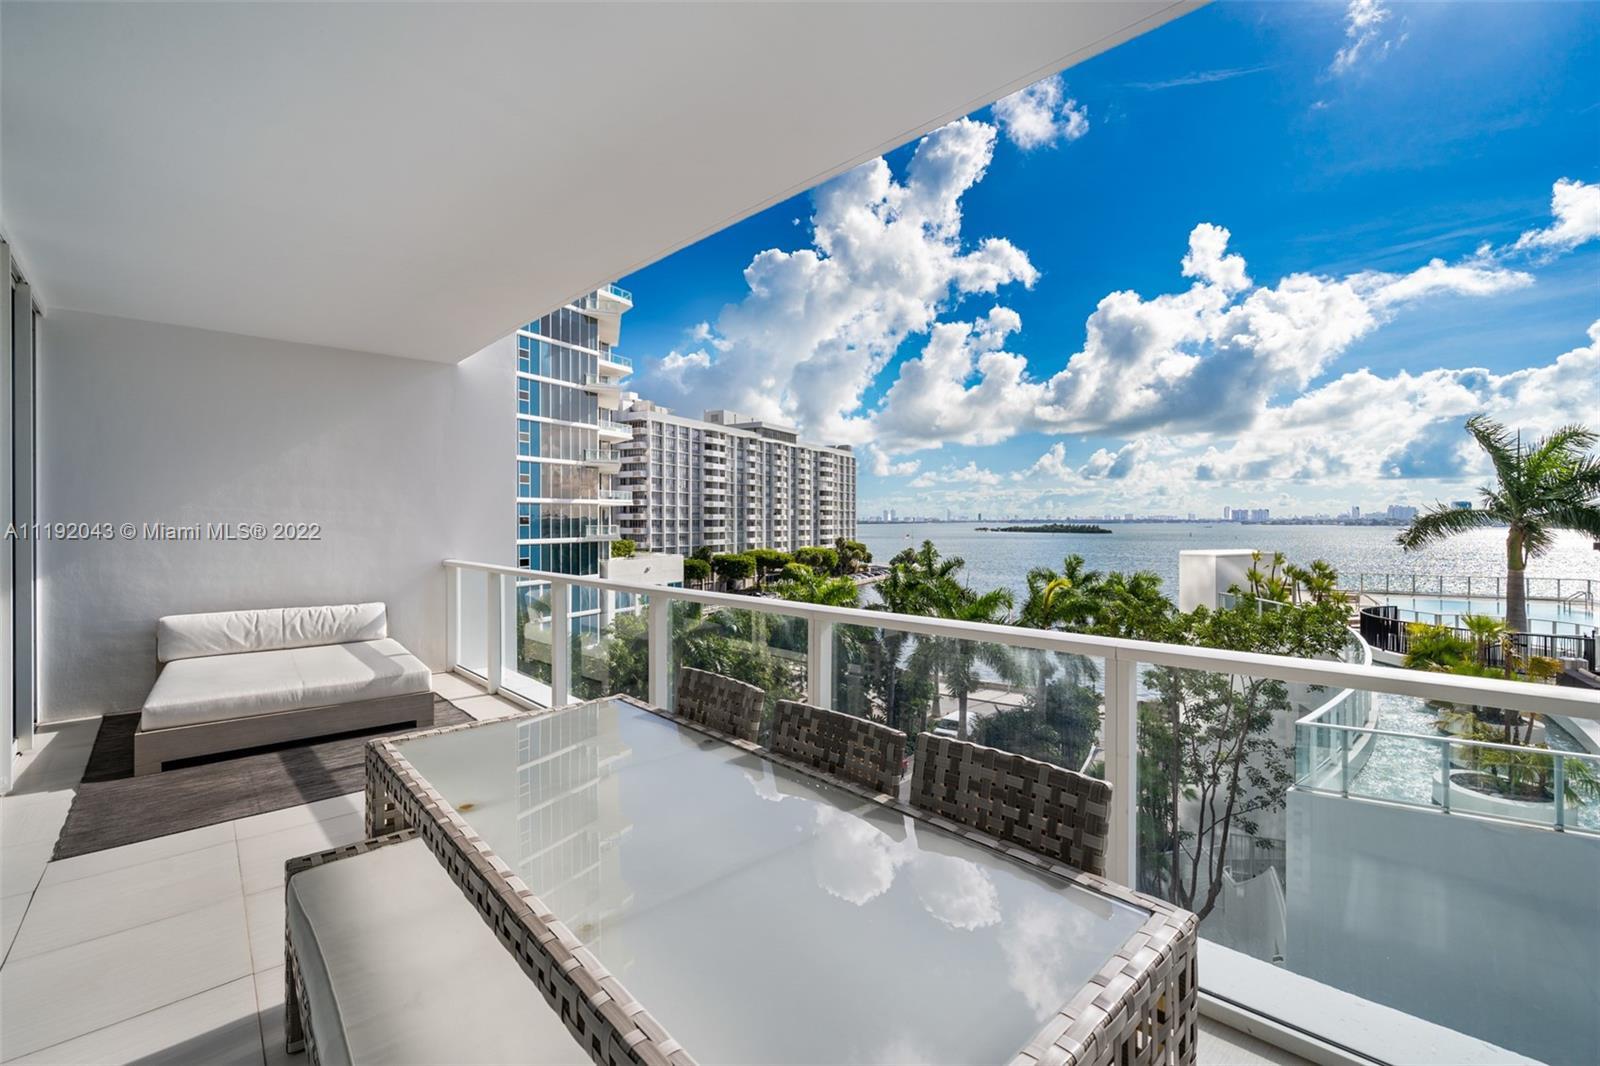 Welcome to Paramount Bay; The definition of Luxury Living in Edgewater Miami. This unit features 2 b